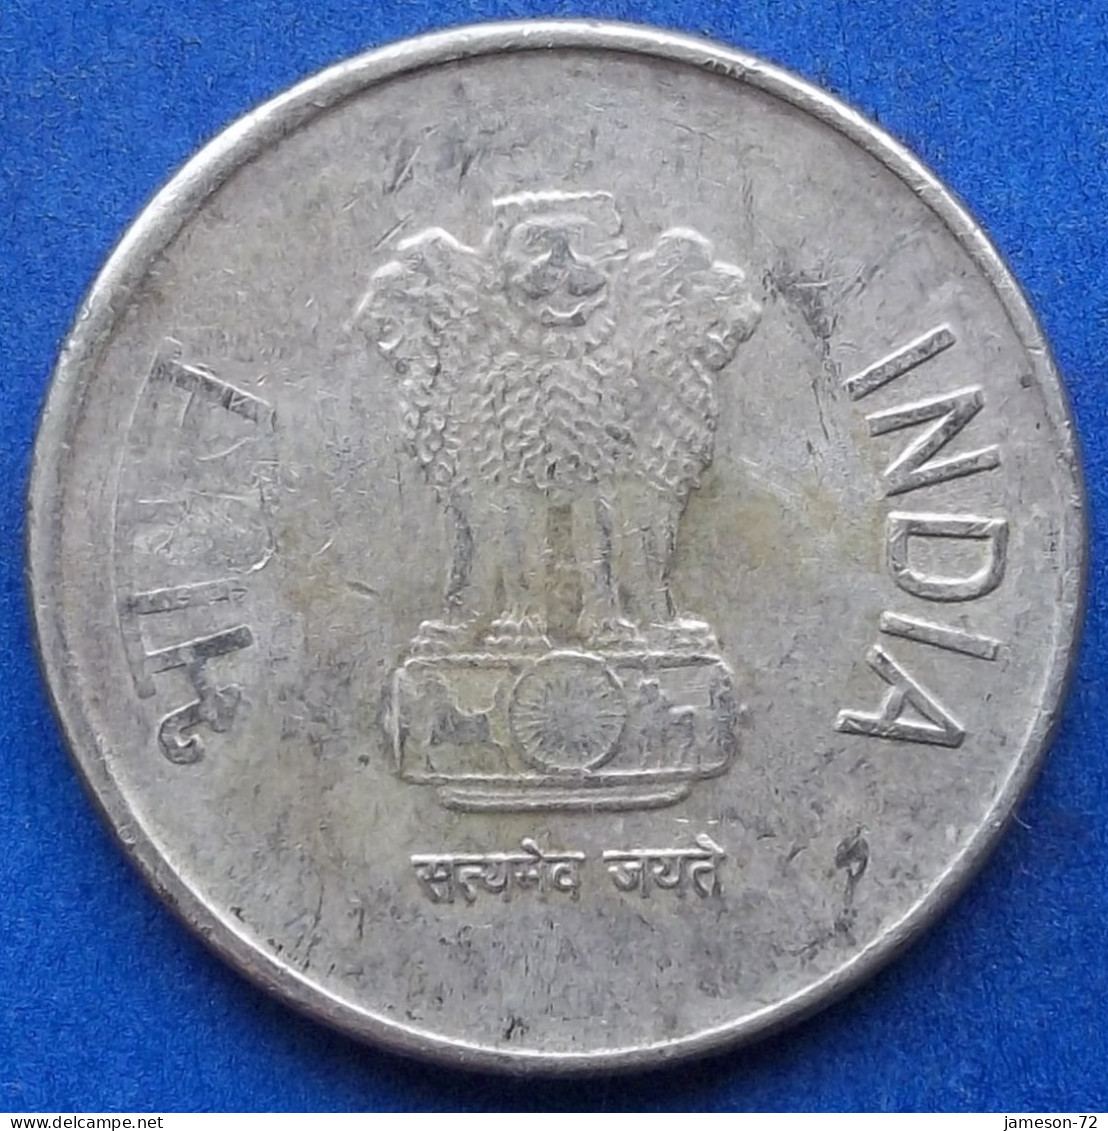 INDIA - 5 Rupees 2016 "Lotus Flowers" KM# 399.1 Republic Decimal Coinage (1957) - Edelweiss Coins - Georgië